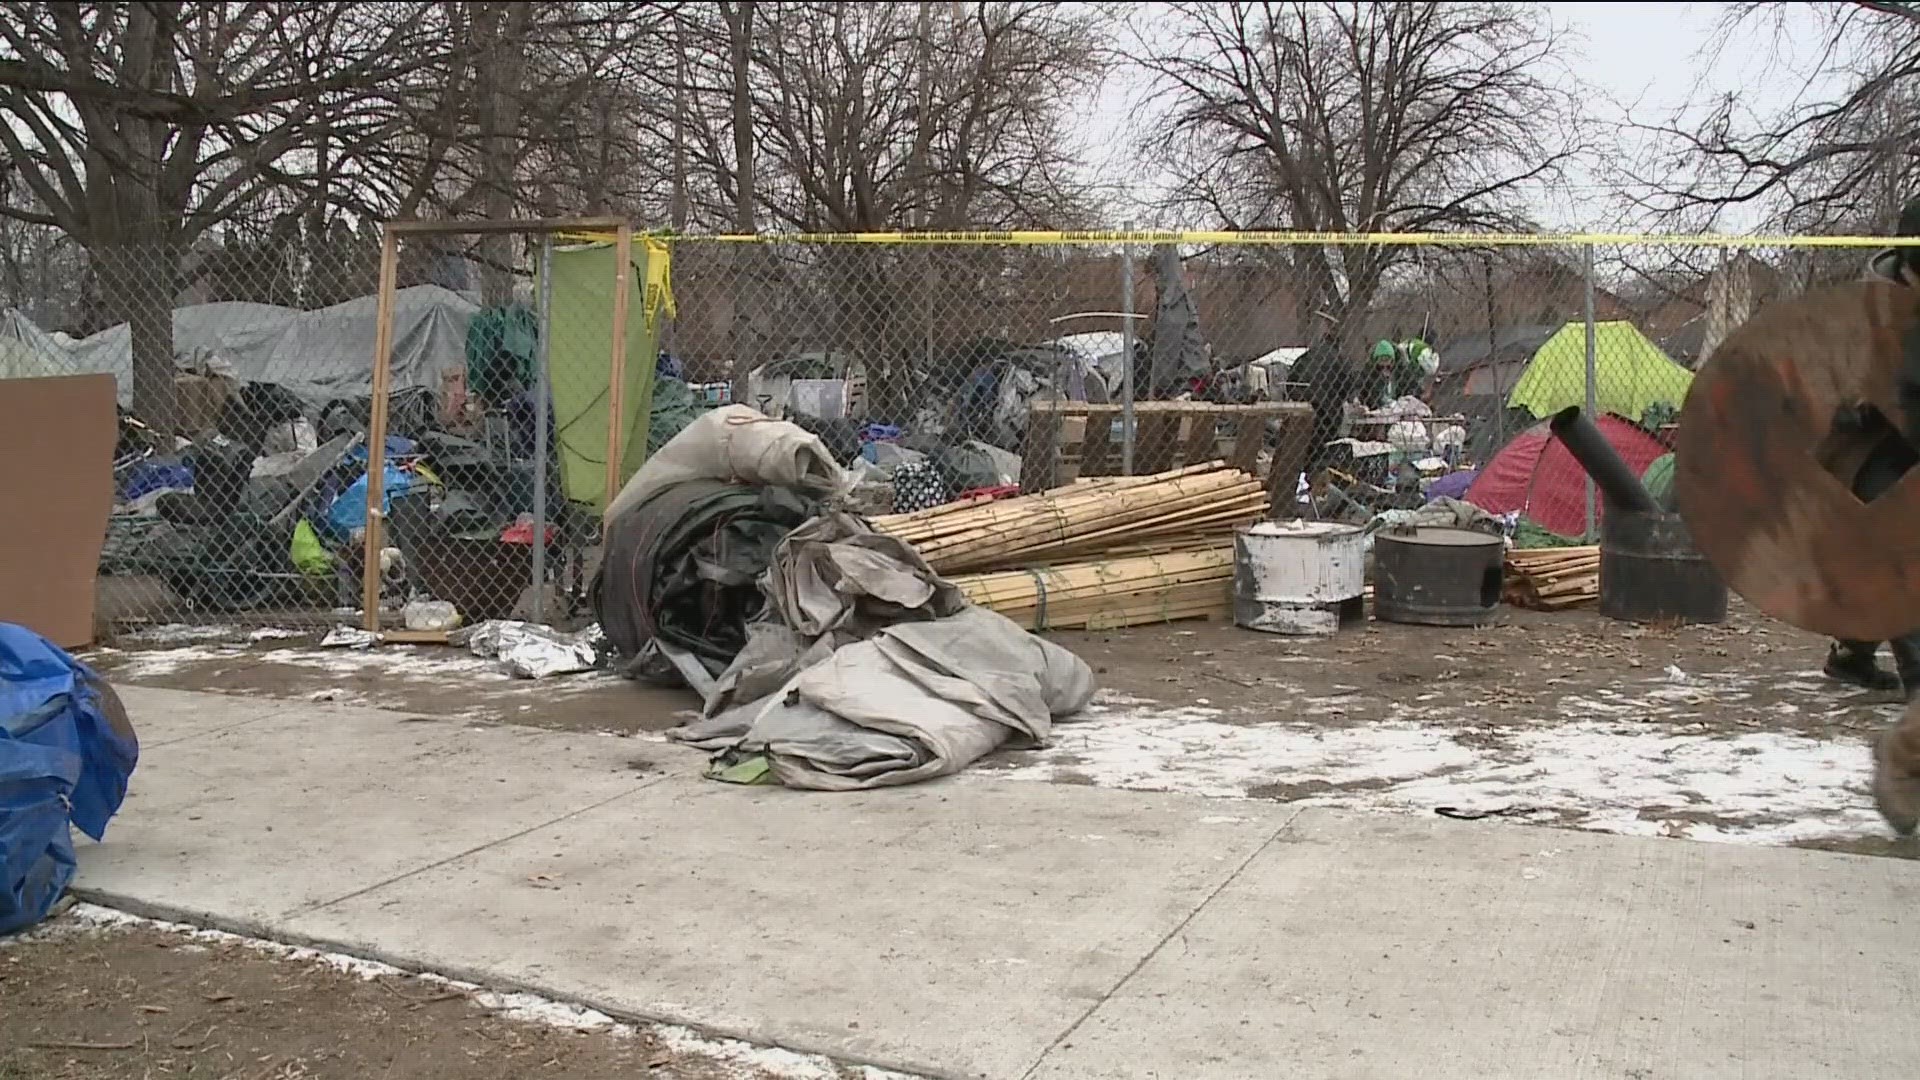 The city argued the encampment does not provide those living there with adequate housing — "especially in winter" — and said the camp is a public safety concern.